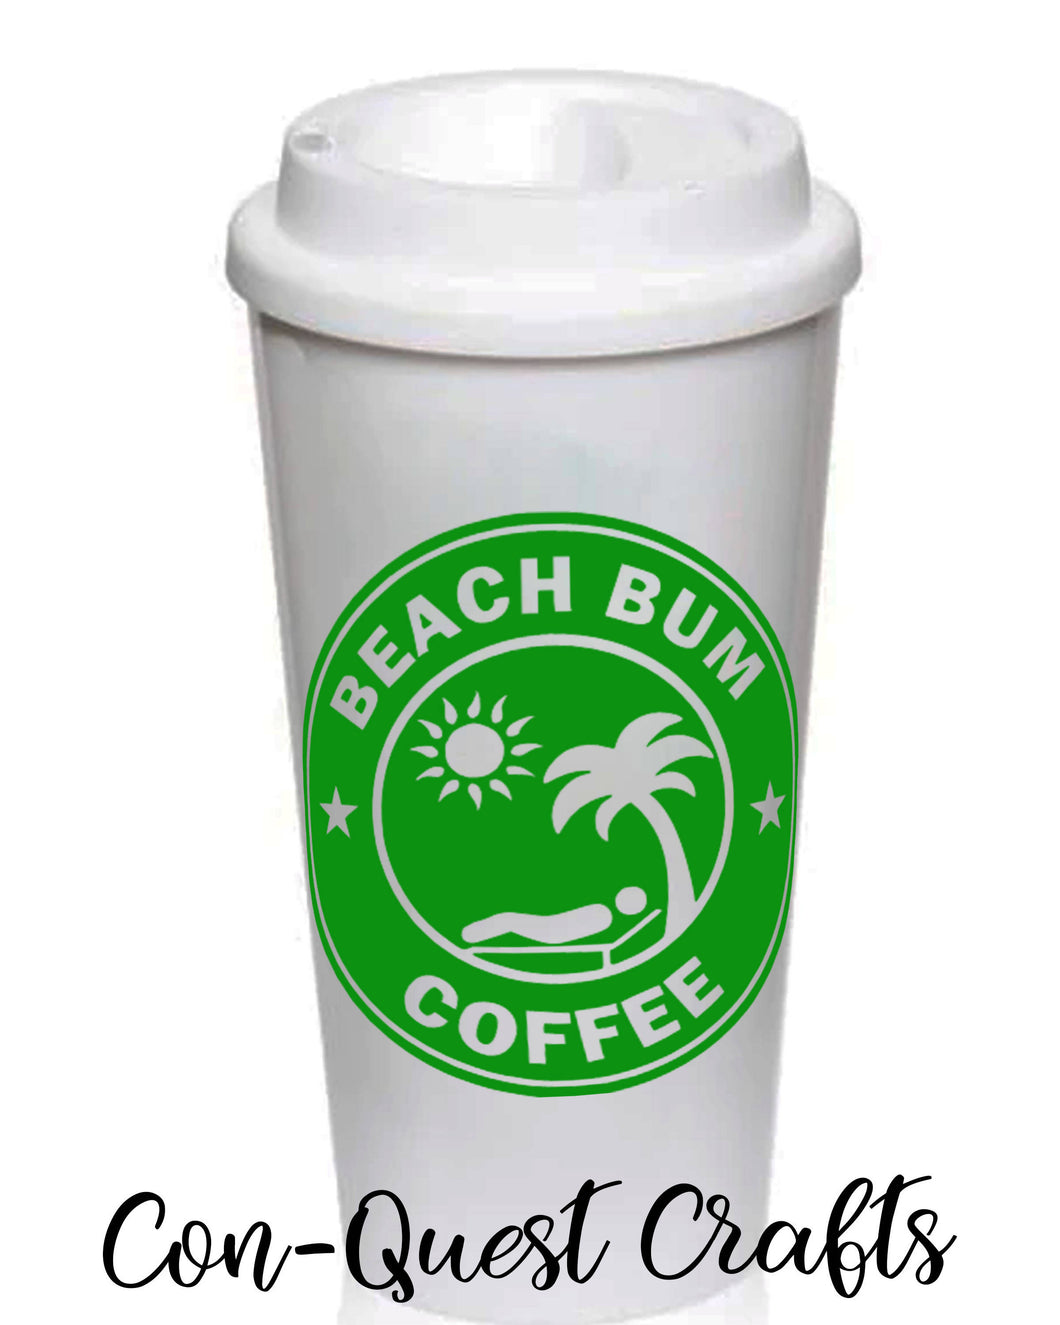 Beach Bum Coffee Permanent Decal - DECAL ONLY